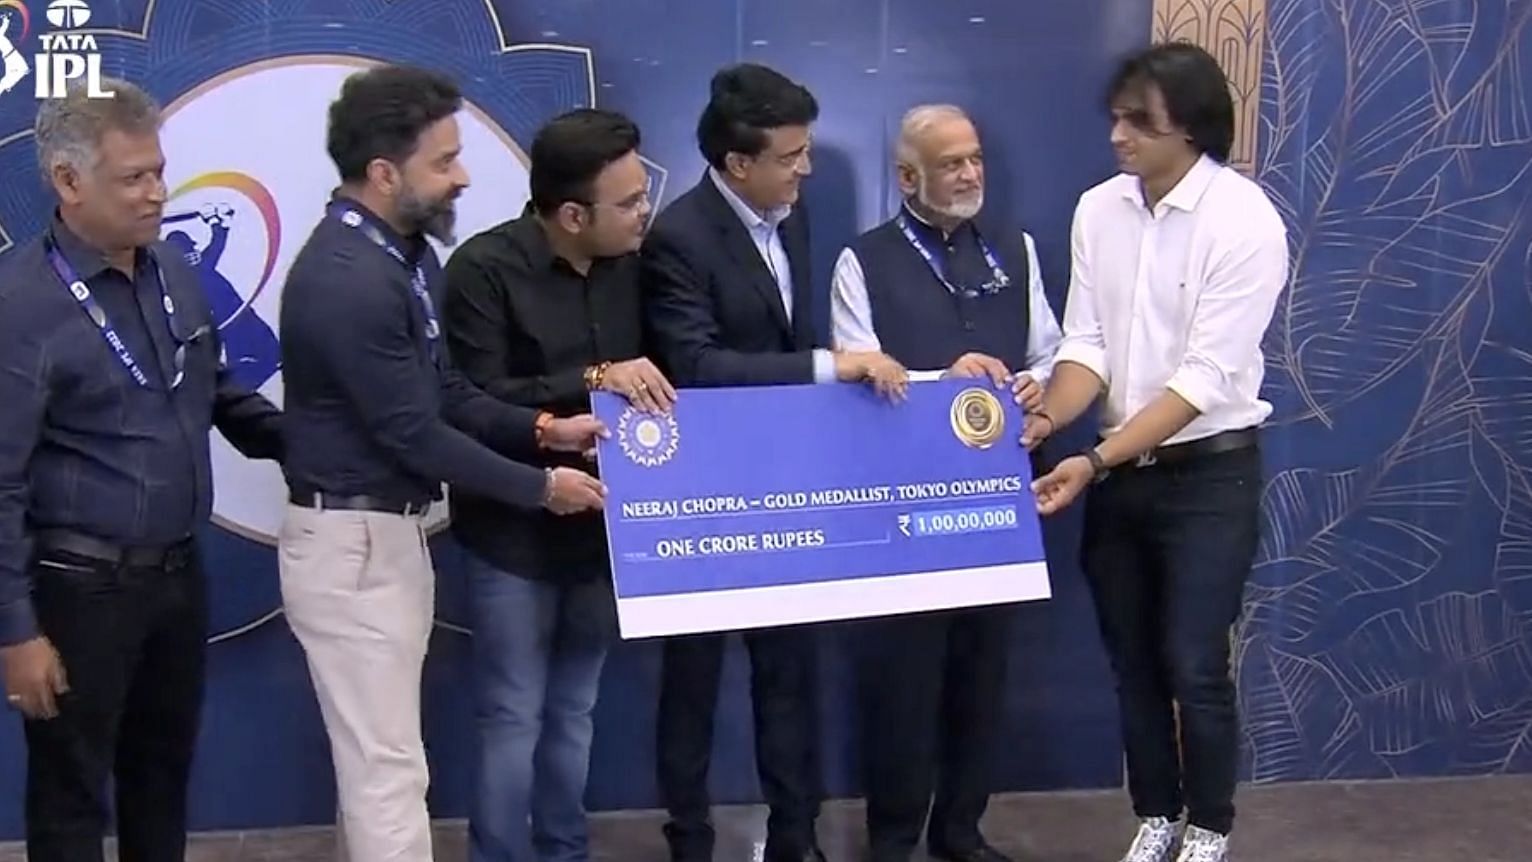 <div class="paragraphs"><p>Neeraj Chopra was felicitated with Rs 1 crore by the BCCI for his Tokyo Olympics gold medal.</p></div>